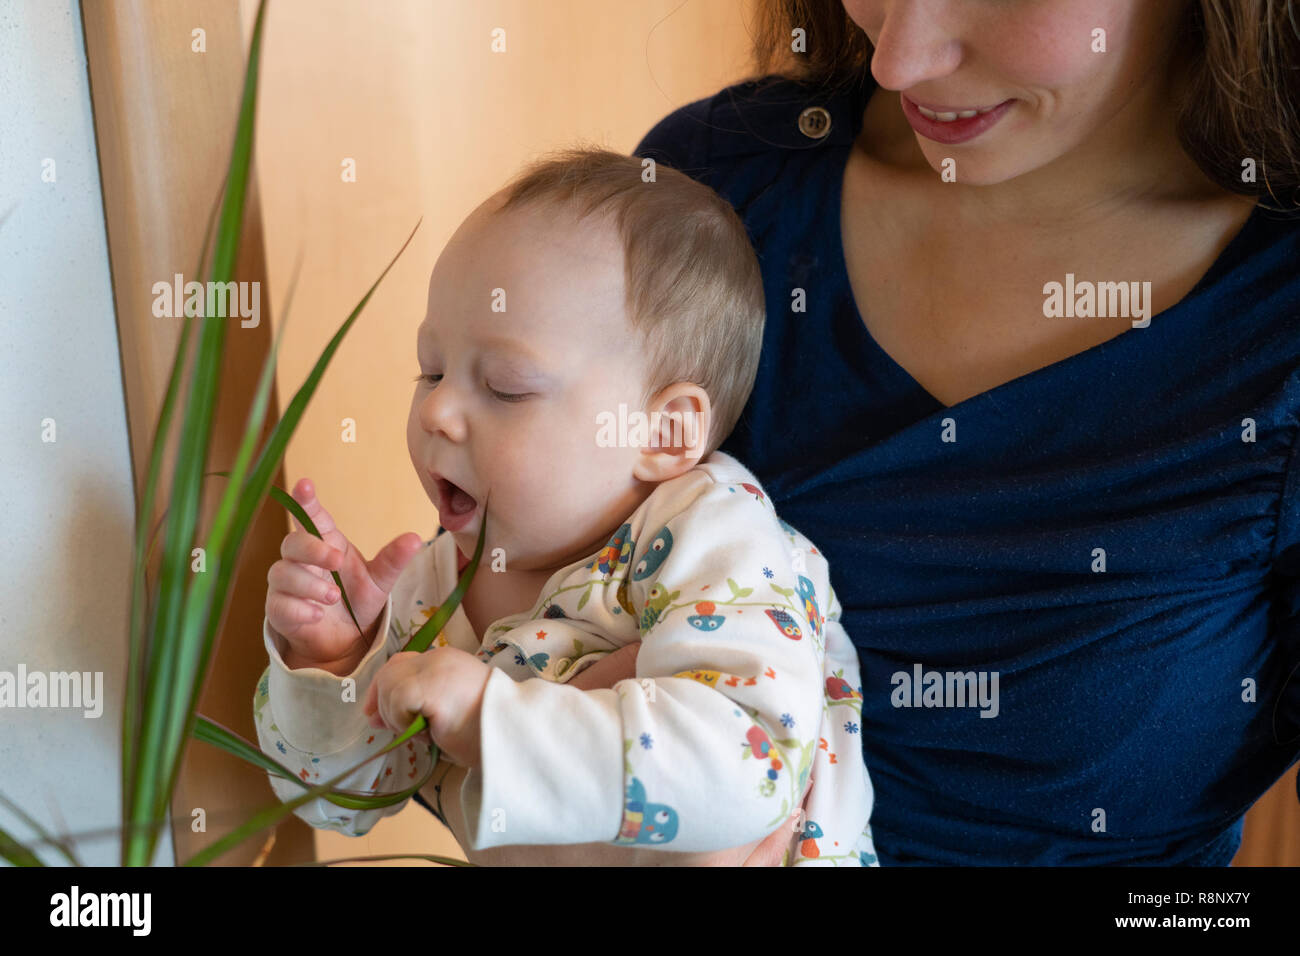 A baby girl being held by her happy mother and exploring her environment by playing with a house plant Stock Photo